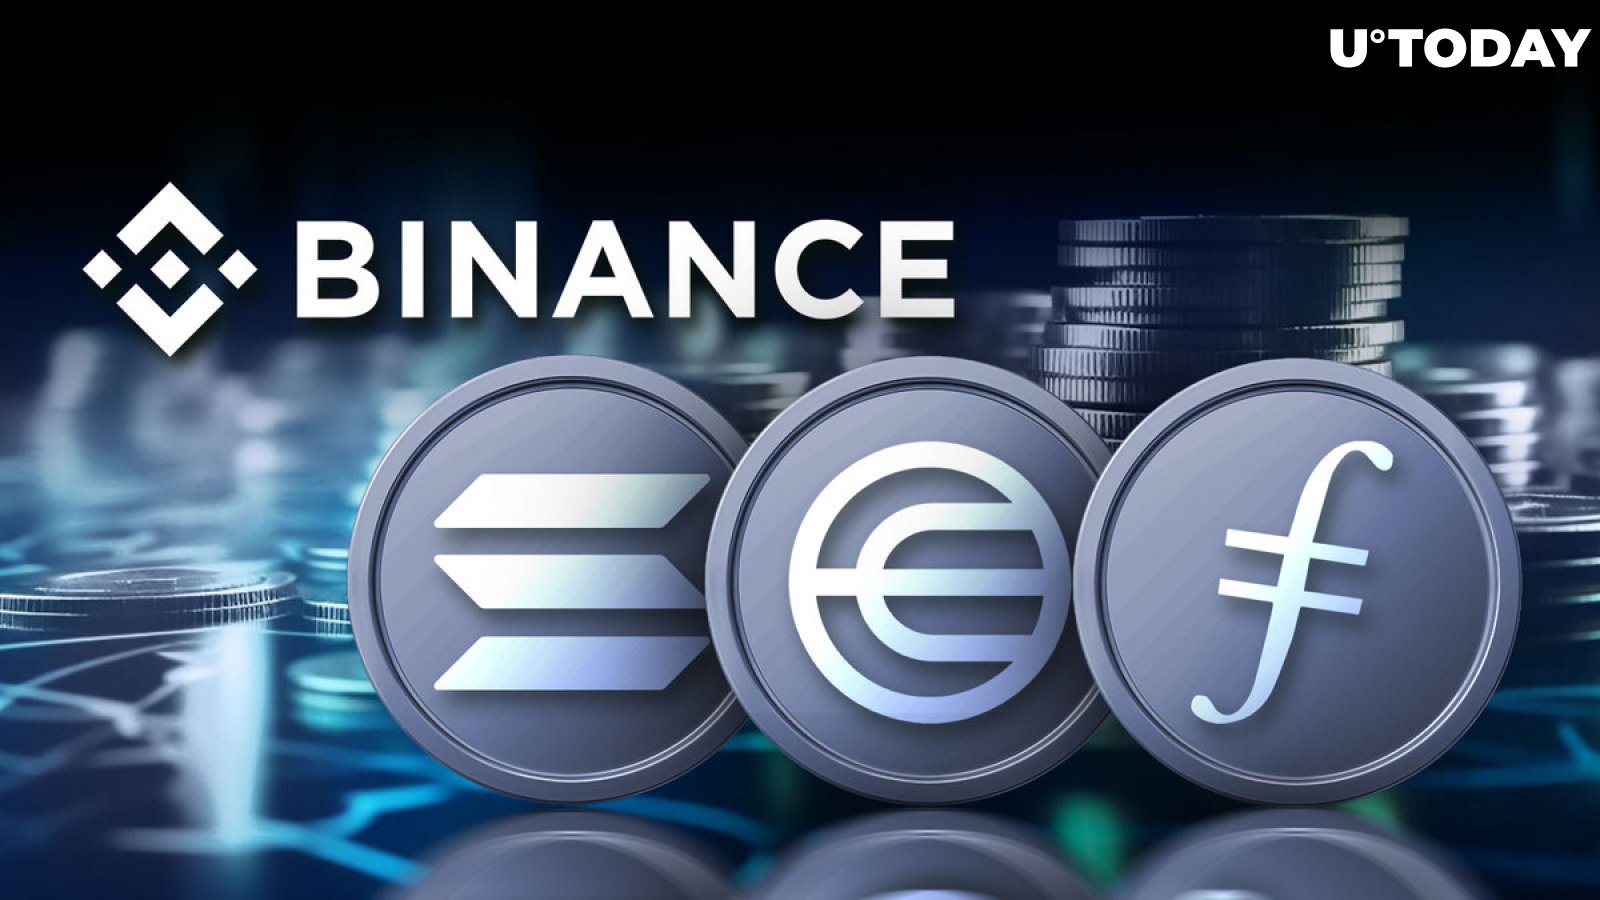 Binance Makes Big Announcement With New Solana, Worldcoin and Filecoin Listings